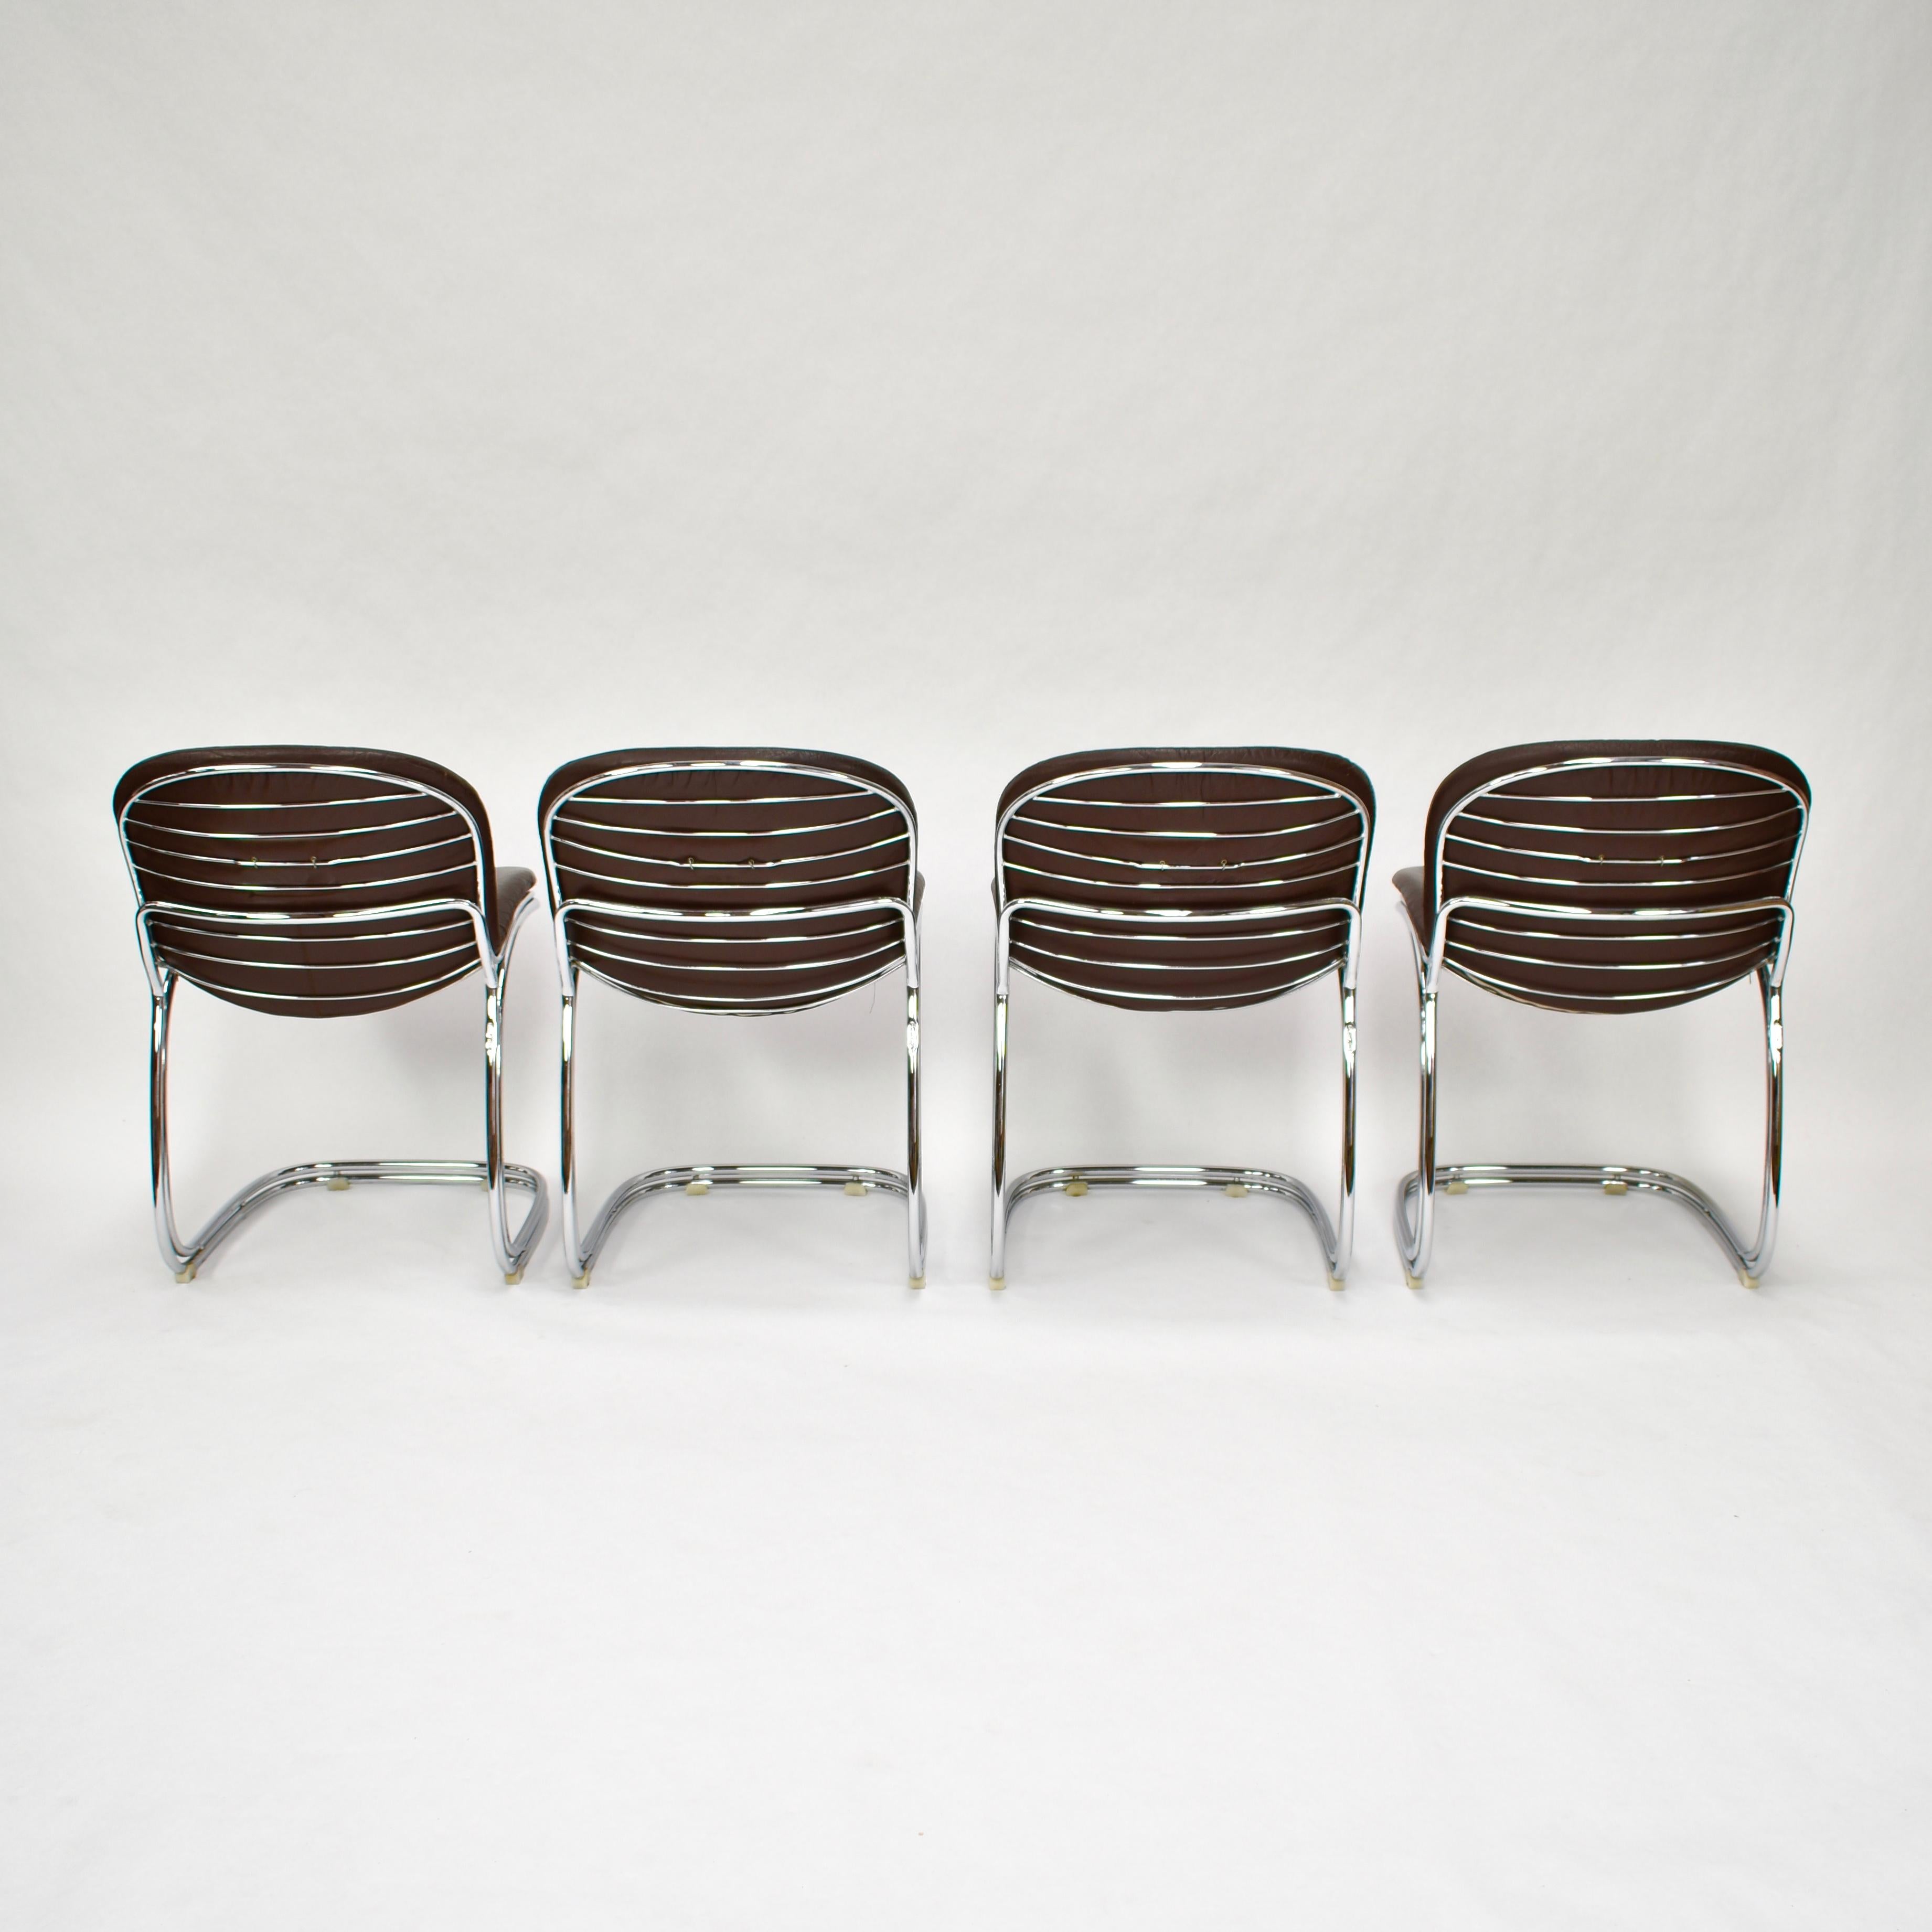 Gastone Rinaldi 'Sabrina' Chocolate Brown Leather Chairs for RIMA, Italy In Good Condition In Pijnacker, Zuid-Holland